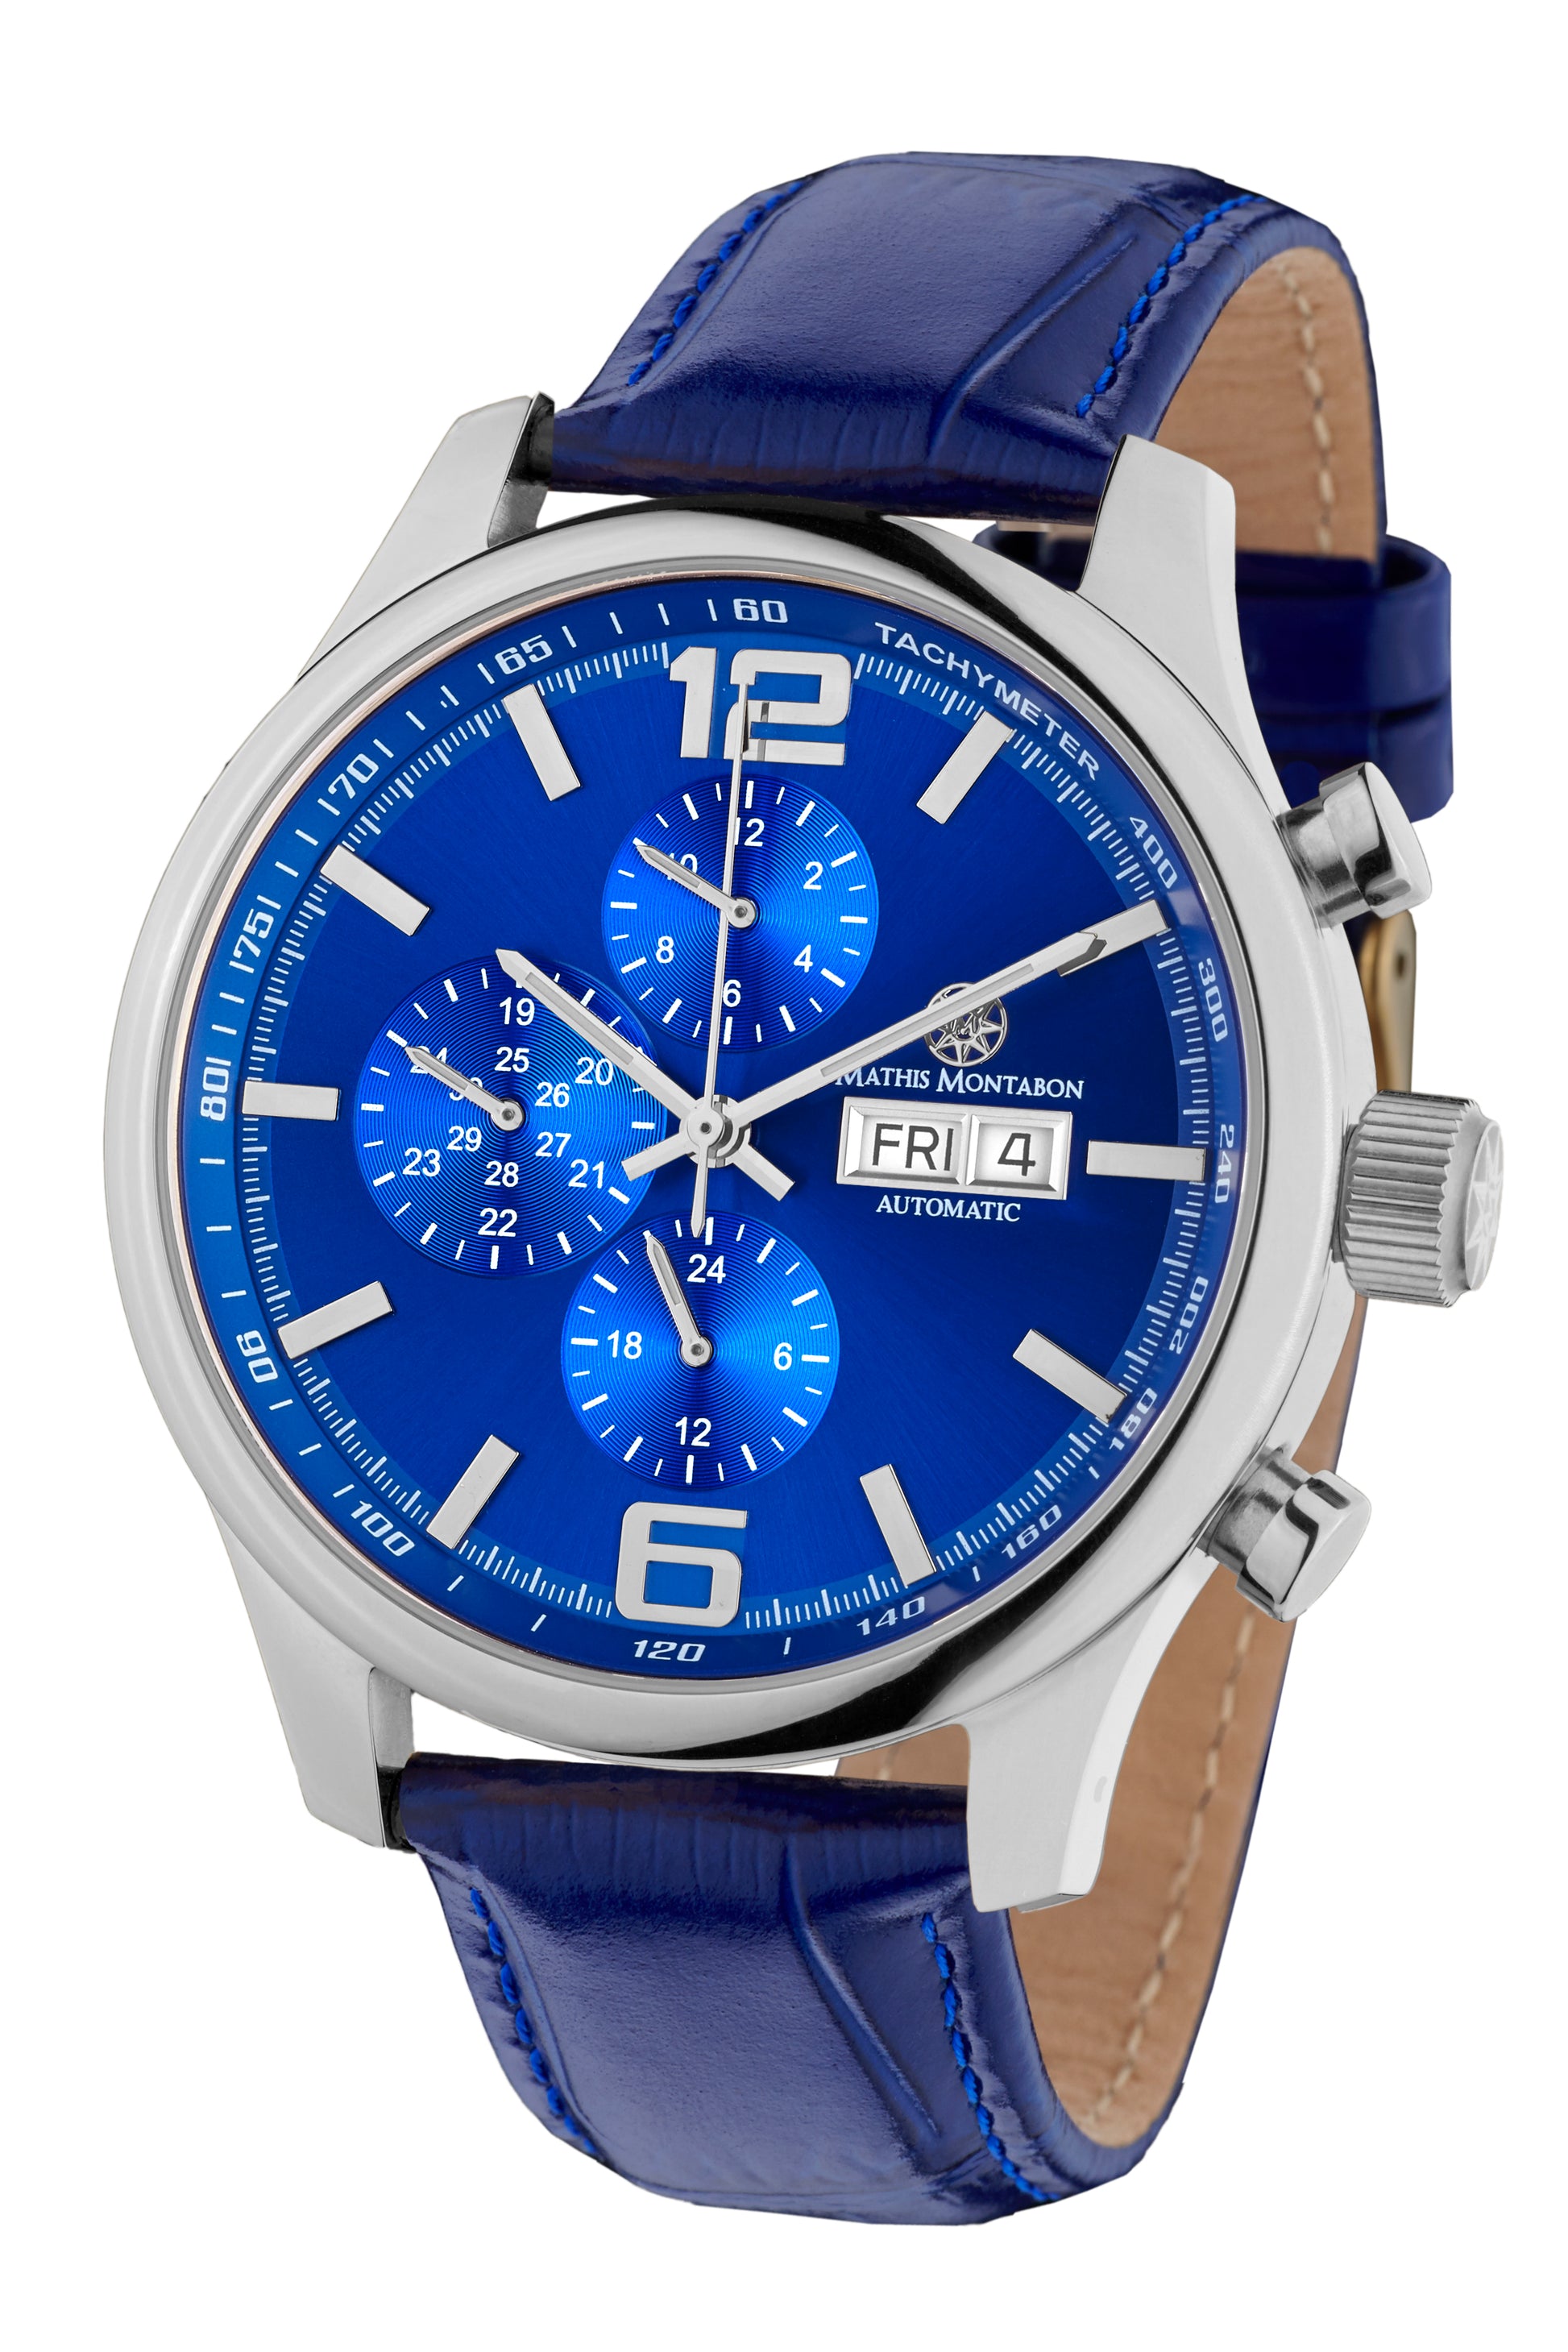 Automatic watches — Grande Date II — Mathis Montabon — blue